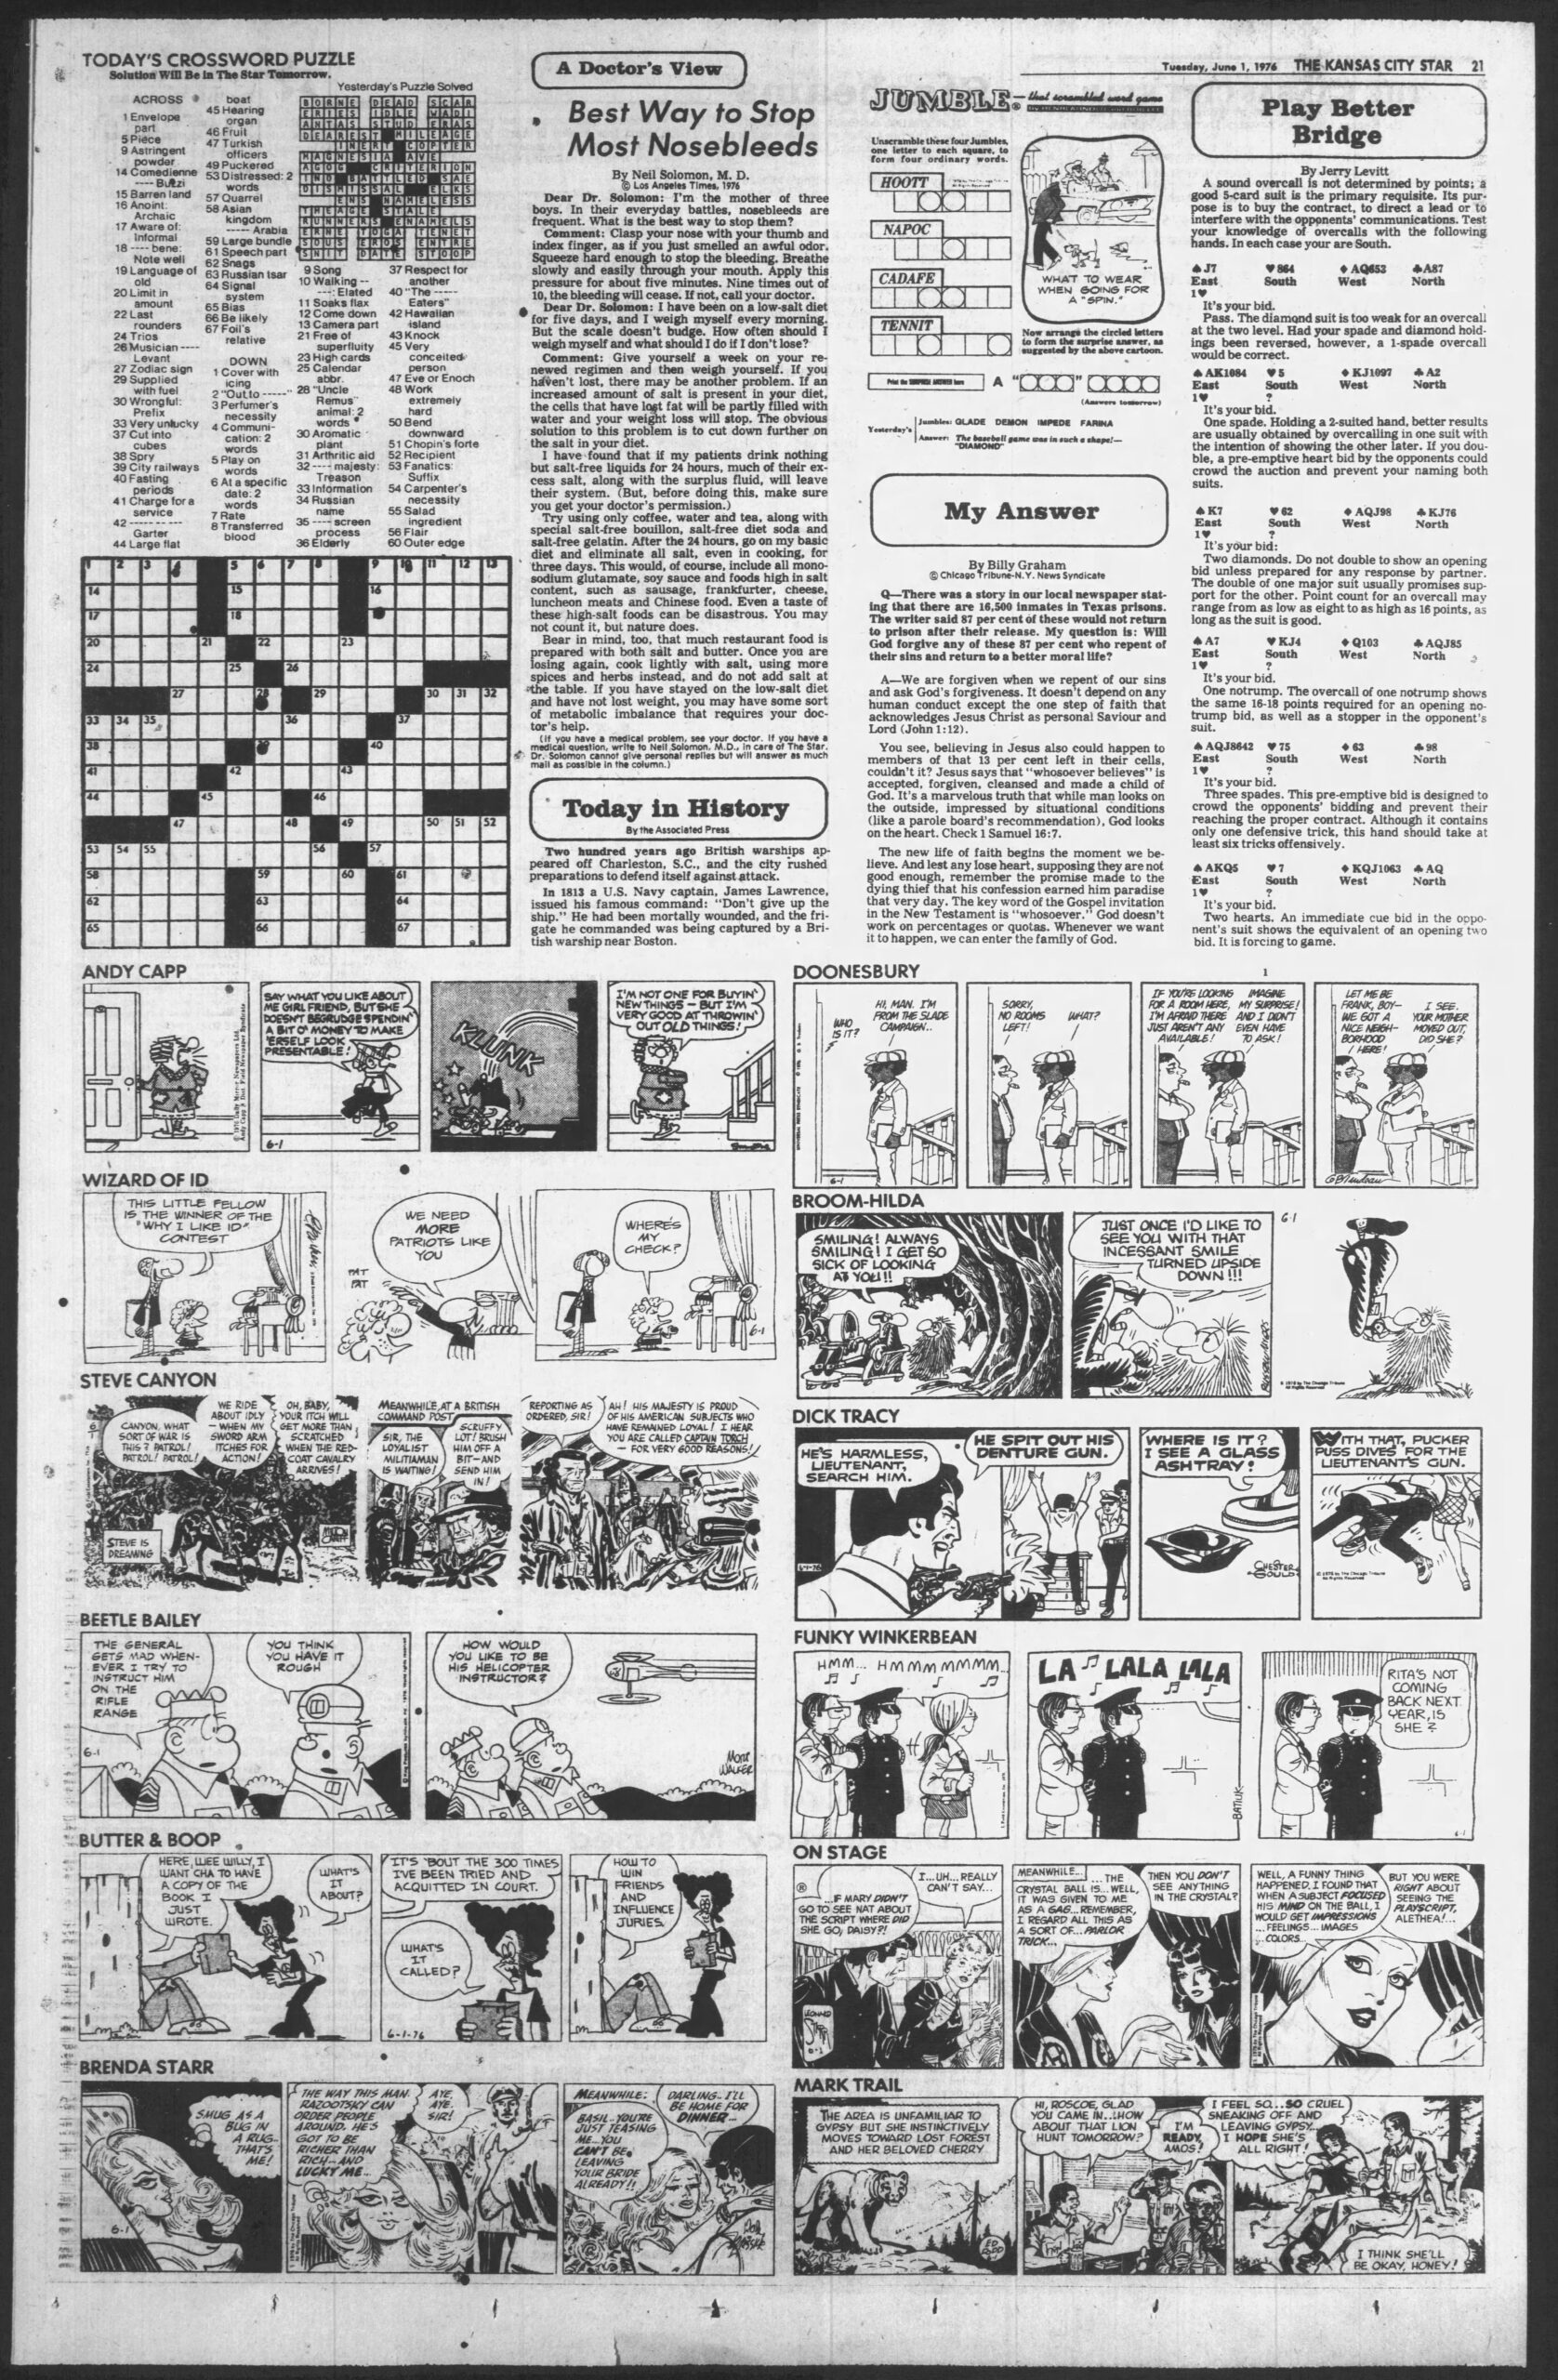 Kansas City Star puzzle page and comics from 1 June 1976